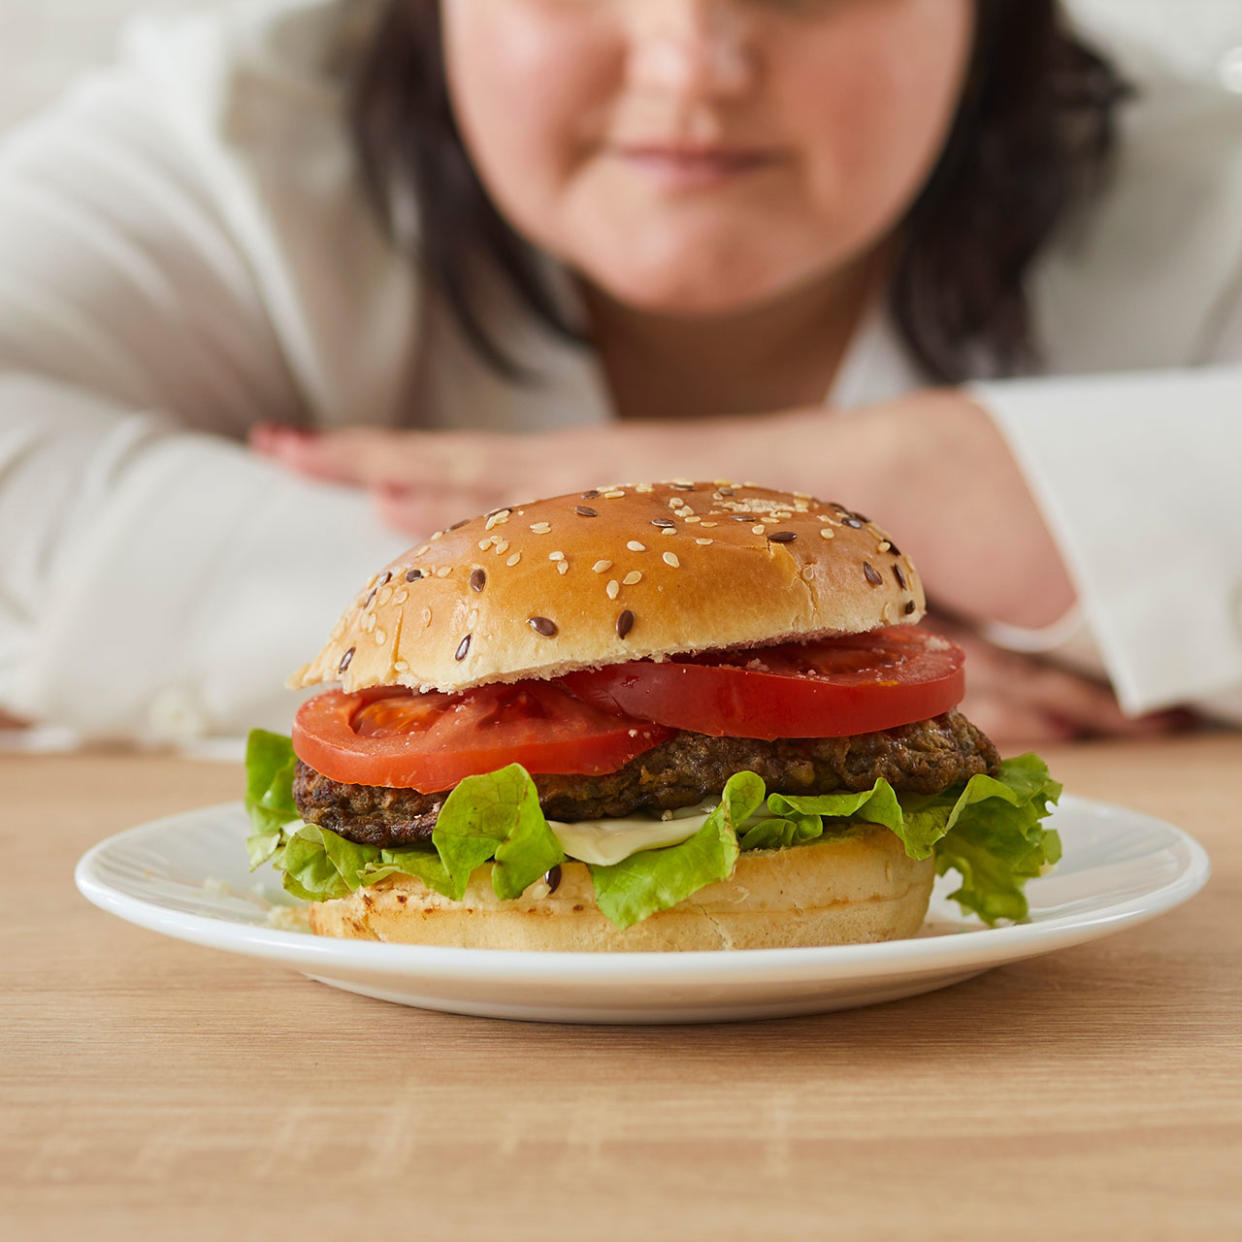 woman staring at a burger on a plate